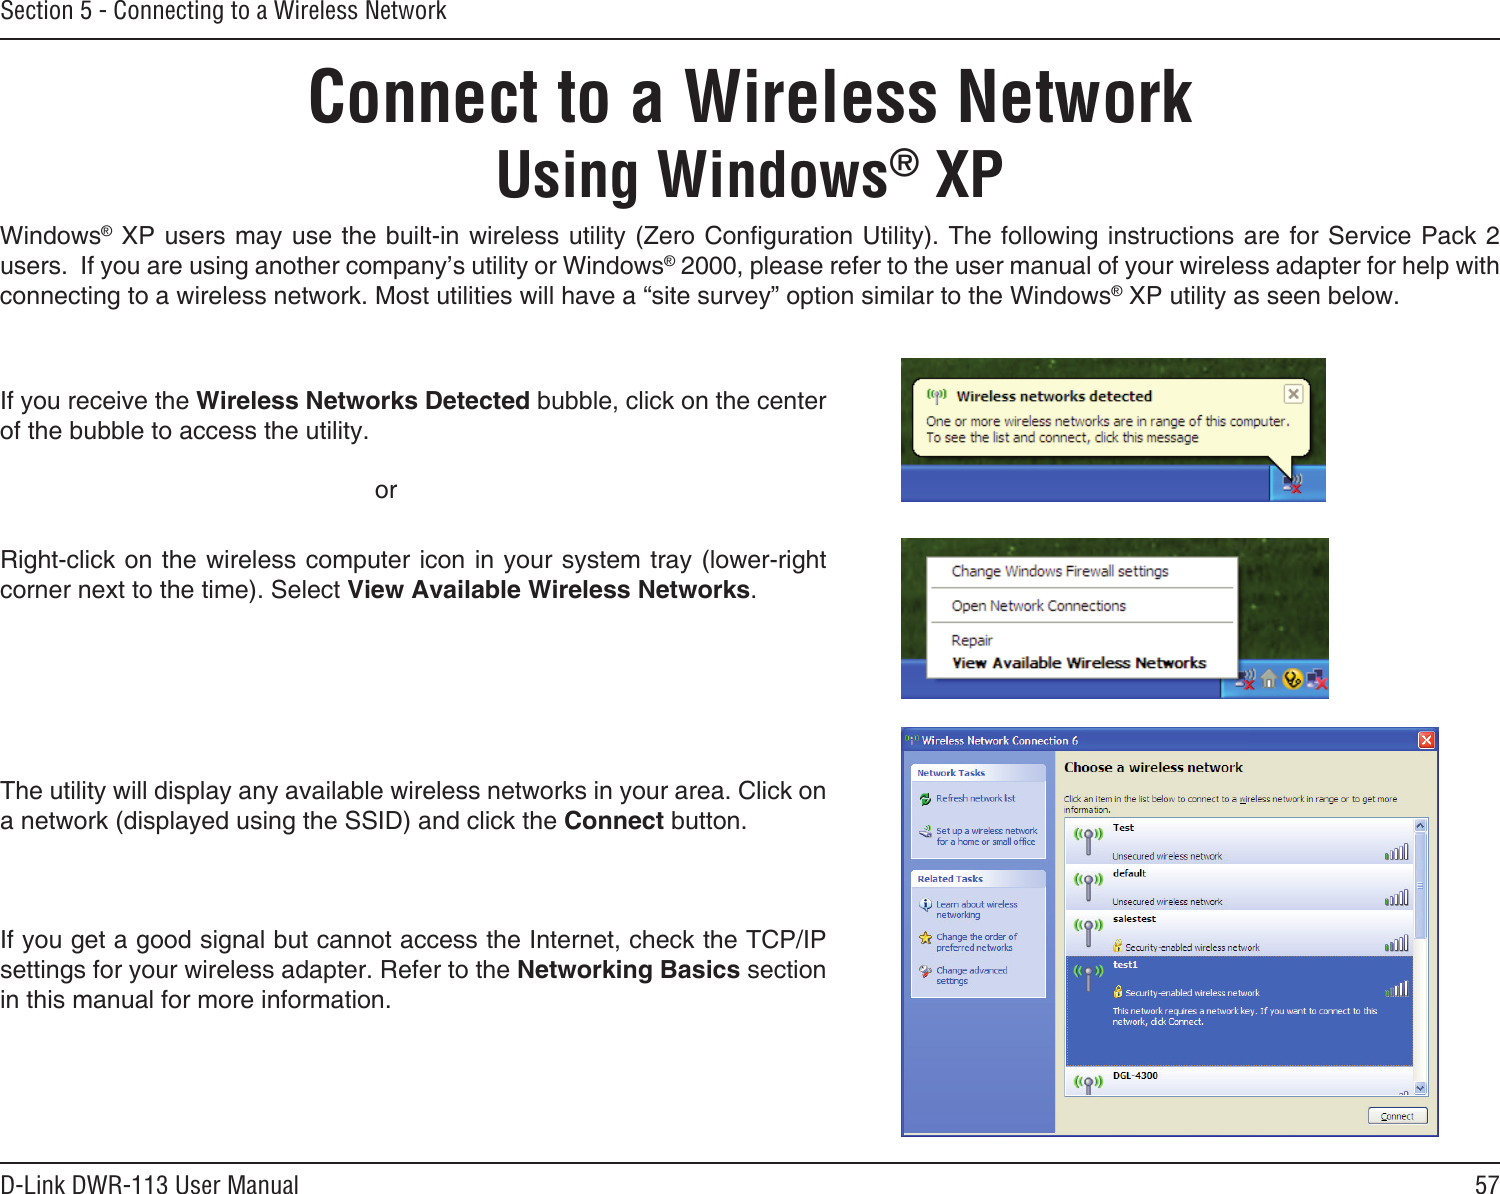 57D-Link DWR-113 User ManualSection 5 - Connecting to a Wireless NetworkConnect to a Wireless NetworkUsing Windows® XPWindows® XP users may use the built-in wireless utility (Zero Conguration Utility). The following  instructions are for Service Pack 2 users.  If you are using another company’s utility or Windows® 2000, please refer to the user manual of your wireless adapter for help with connecting to a wireless network. Most utilities will have a “site survey” option similar to the Windows® XP utility as seen below.Right-click on the wireless computer icon in your system tray (lower-right corner next to the time). Select View Available Wireless Networks.If you receive the Wireless Networks Detected bubble, click on the center of the bubble to access the utility.     orThe utility will display any available wireless networks in your area. Click on a network (displayed using the SSID) and click the Connect button.If you get a good signal but cannot access the Internet, check the TCP/IP settings for your wireless adapter. Refer to the Networking Basics section in this manual for more information.